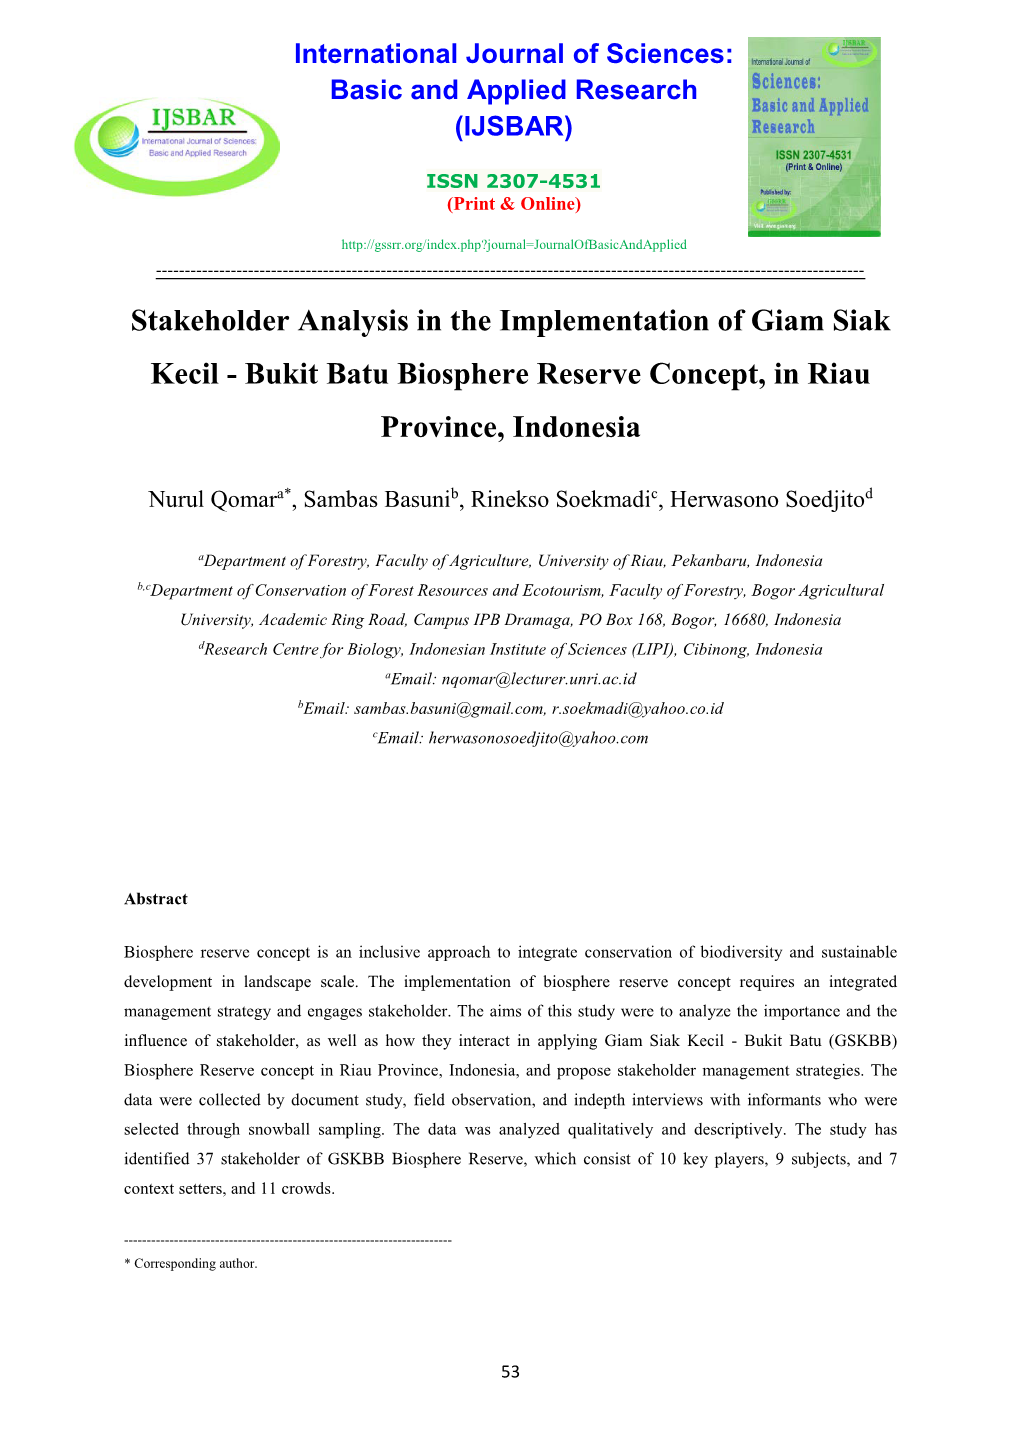 Stakeholder Analysis in the Implementation of Giam Siak Kecil - Bukit Batu Biosphere Reserve Concept, in Riau Province, Indonesia